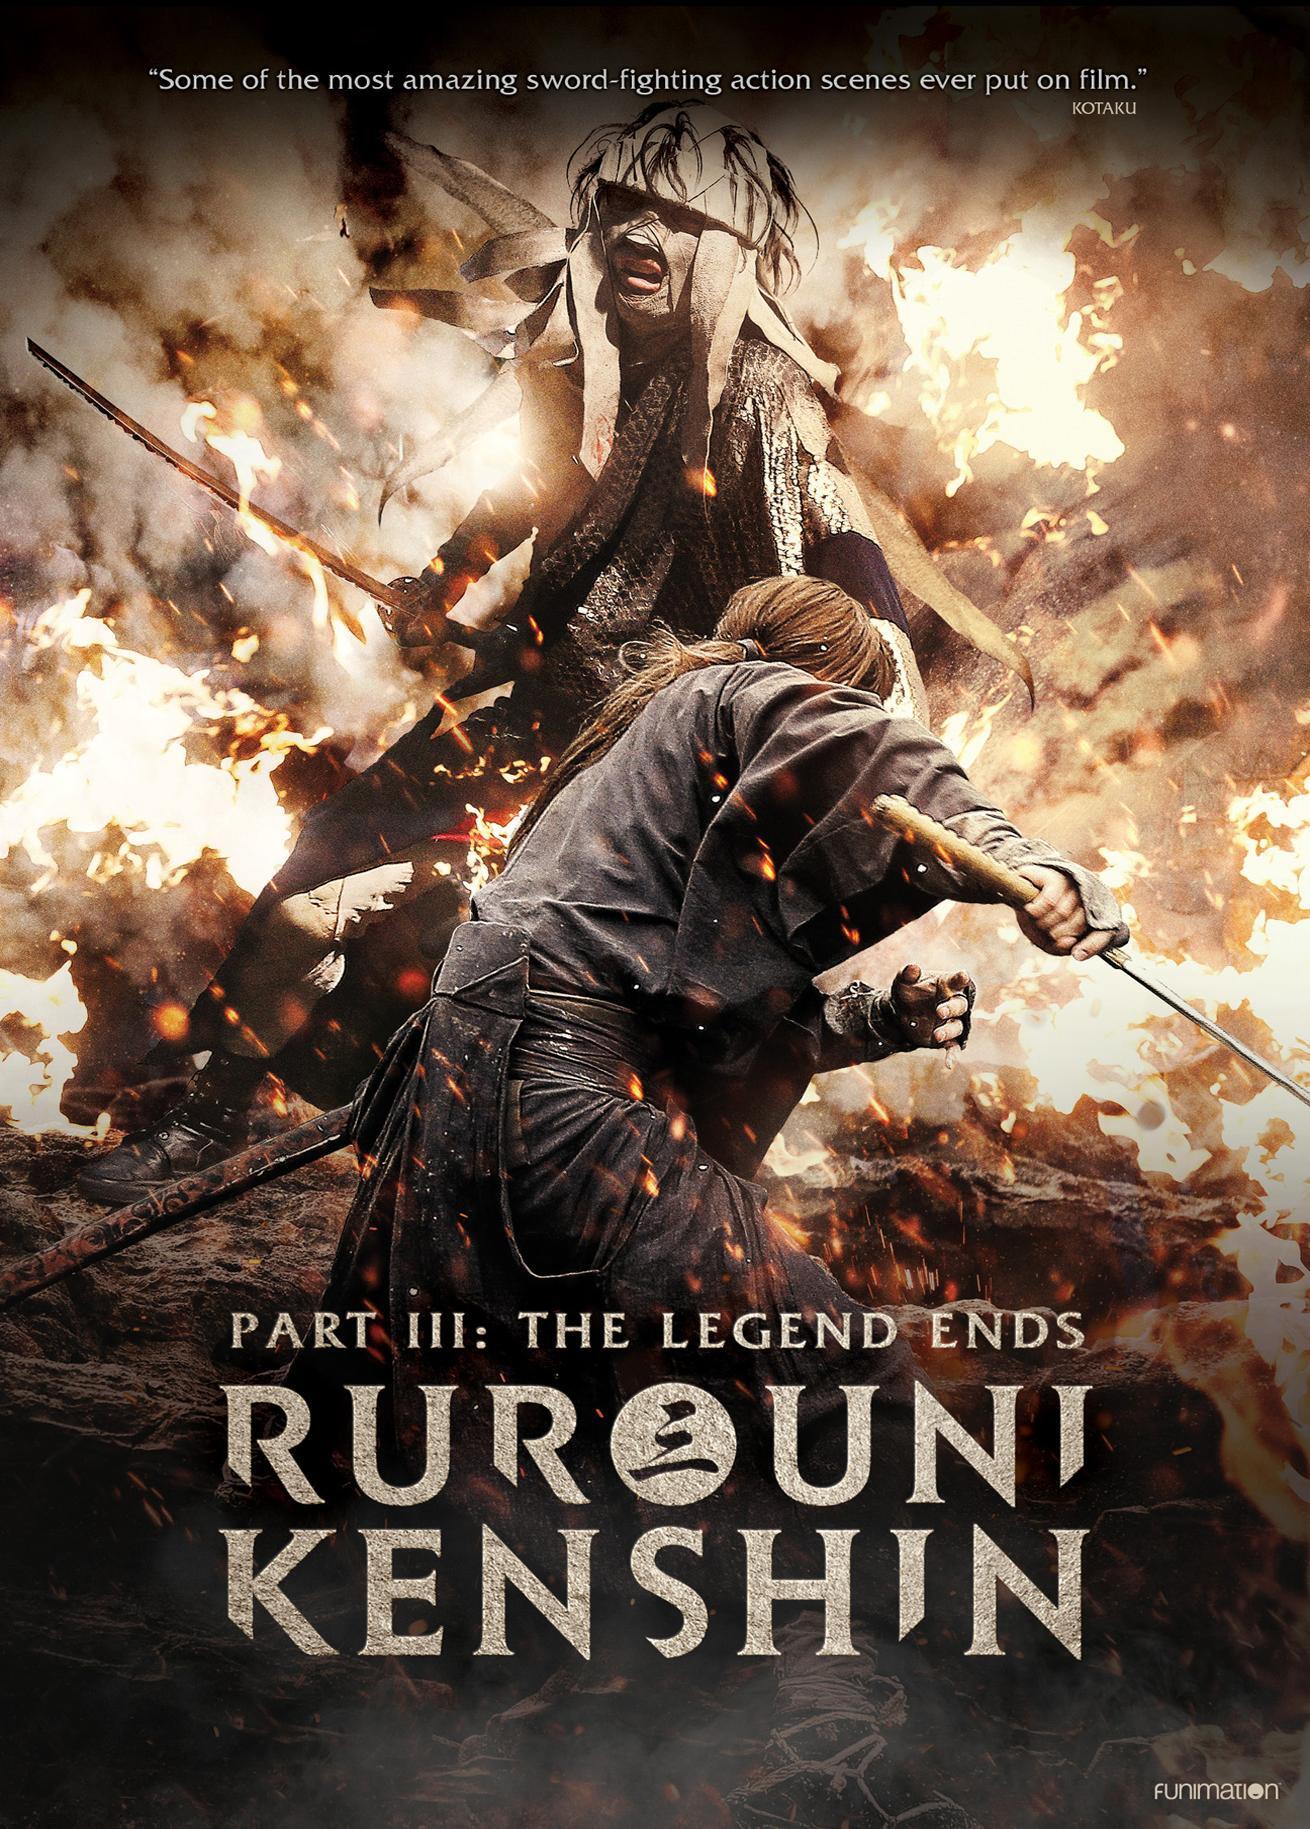 Rurouni Kenshin: Part III - The Legend Ends - DVD [ 2014 ]  - Foreign Movies On DVD - Movies On GRUV